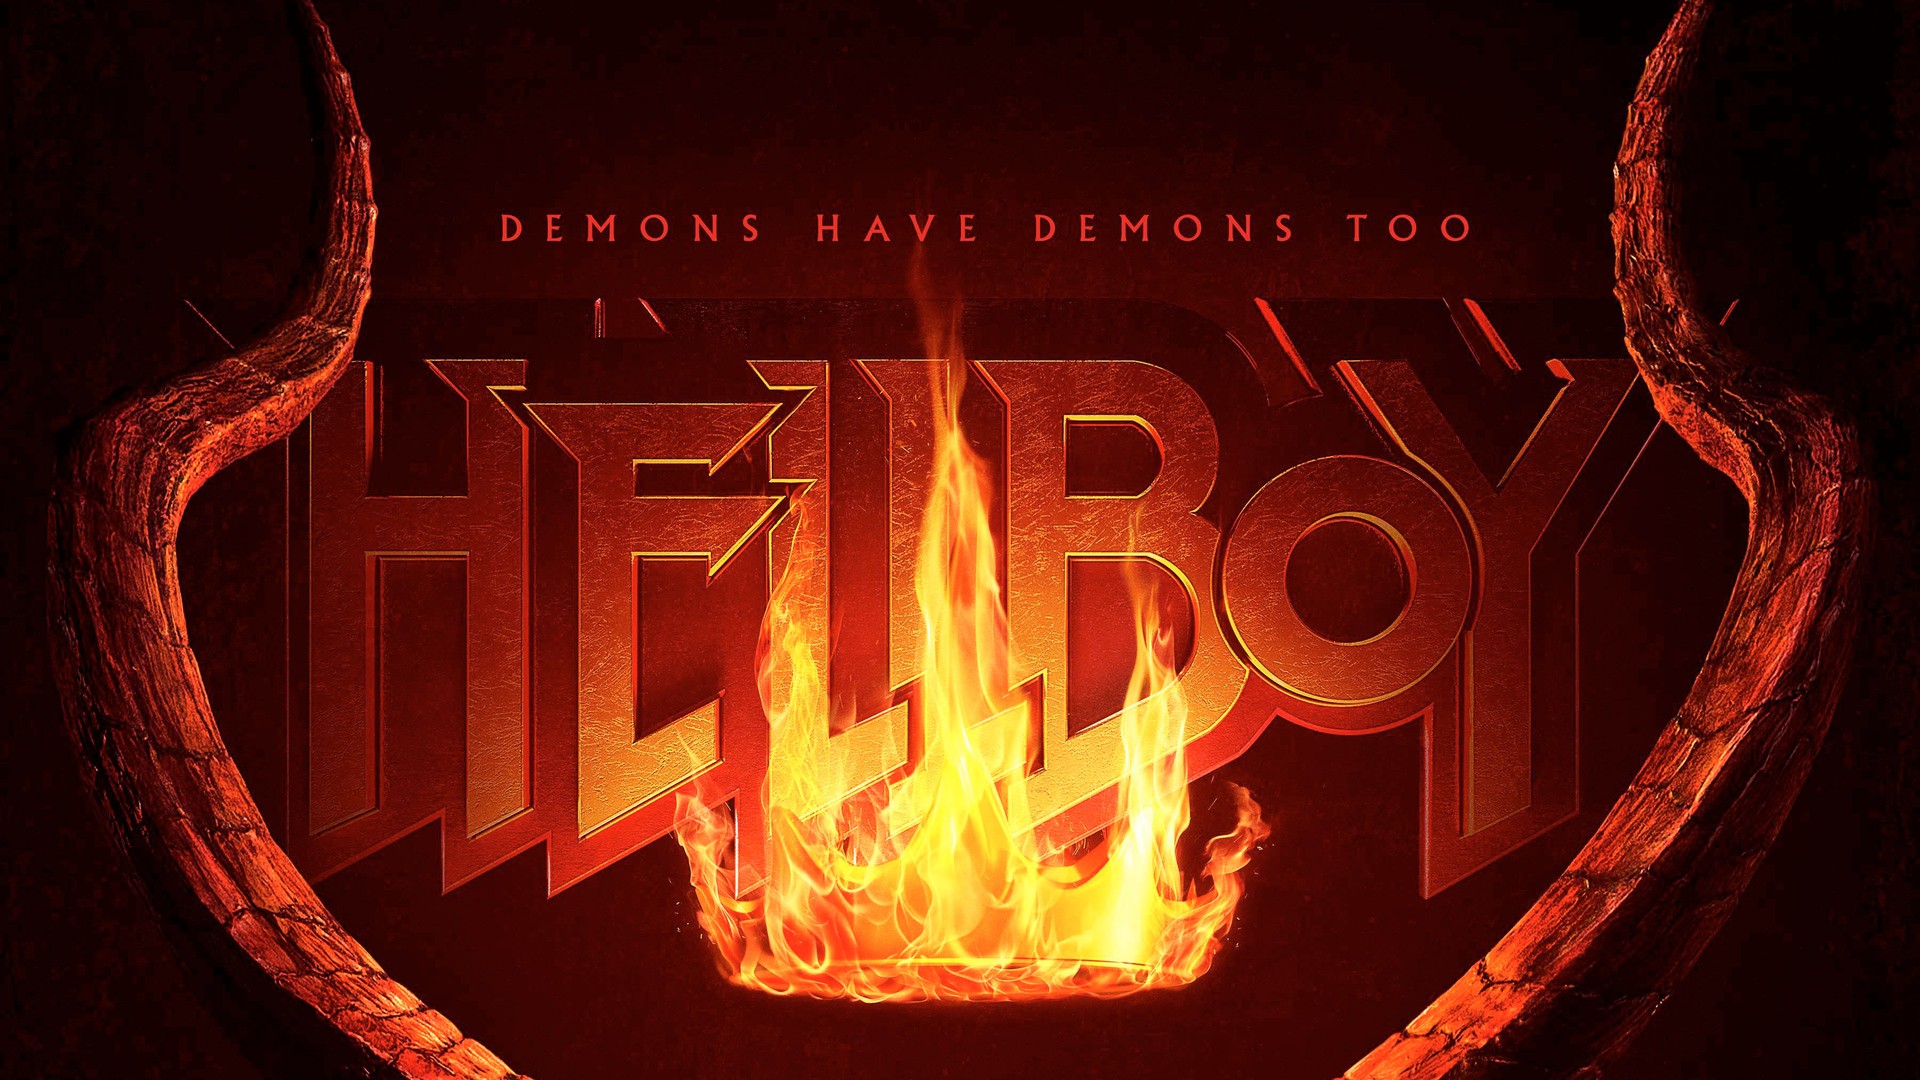 Hellboy 2019 Movie Wallpaper with high-resolution 1920x1080 pixel. You can use this poster wallpaper for your Desktop Computers, Mac Screensavers, Windows Backgrounds, iPhone Wallpapers, Tablet or Android Lock screen and another Mobile device